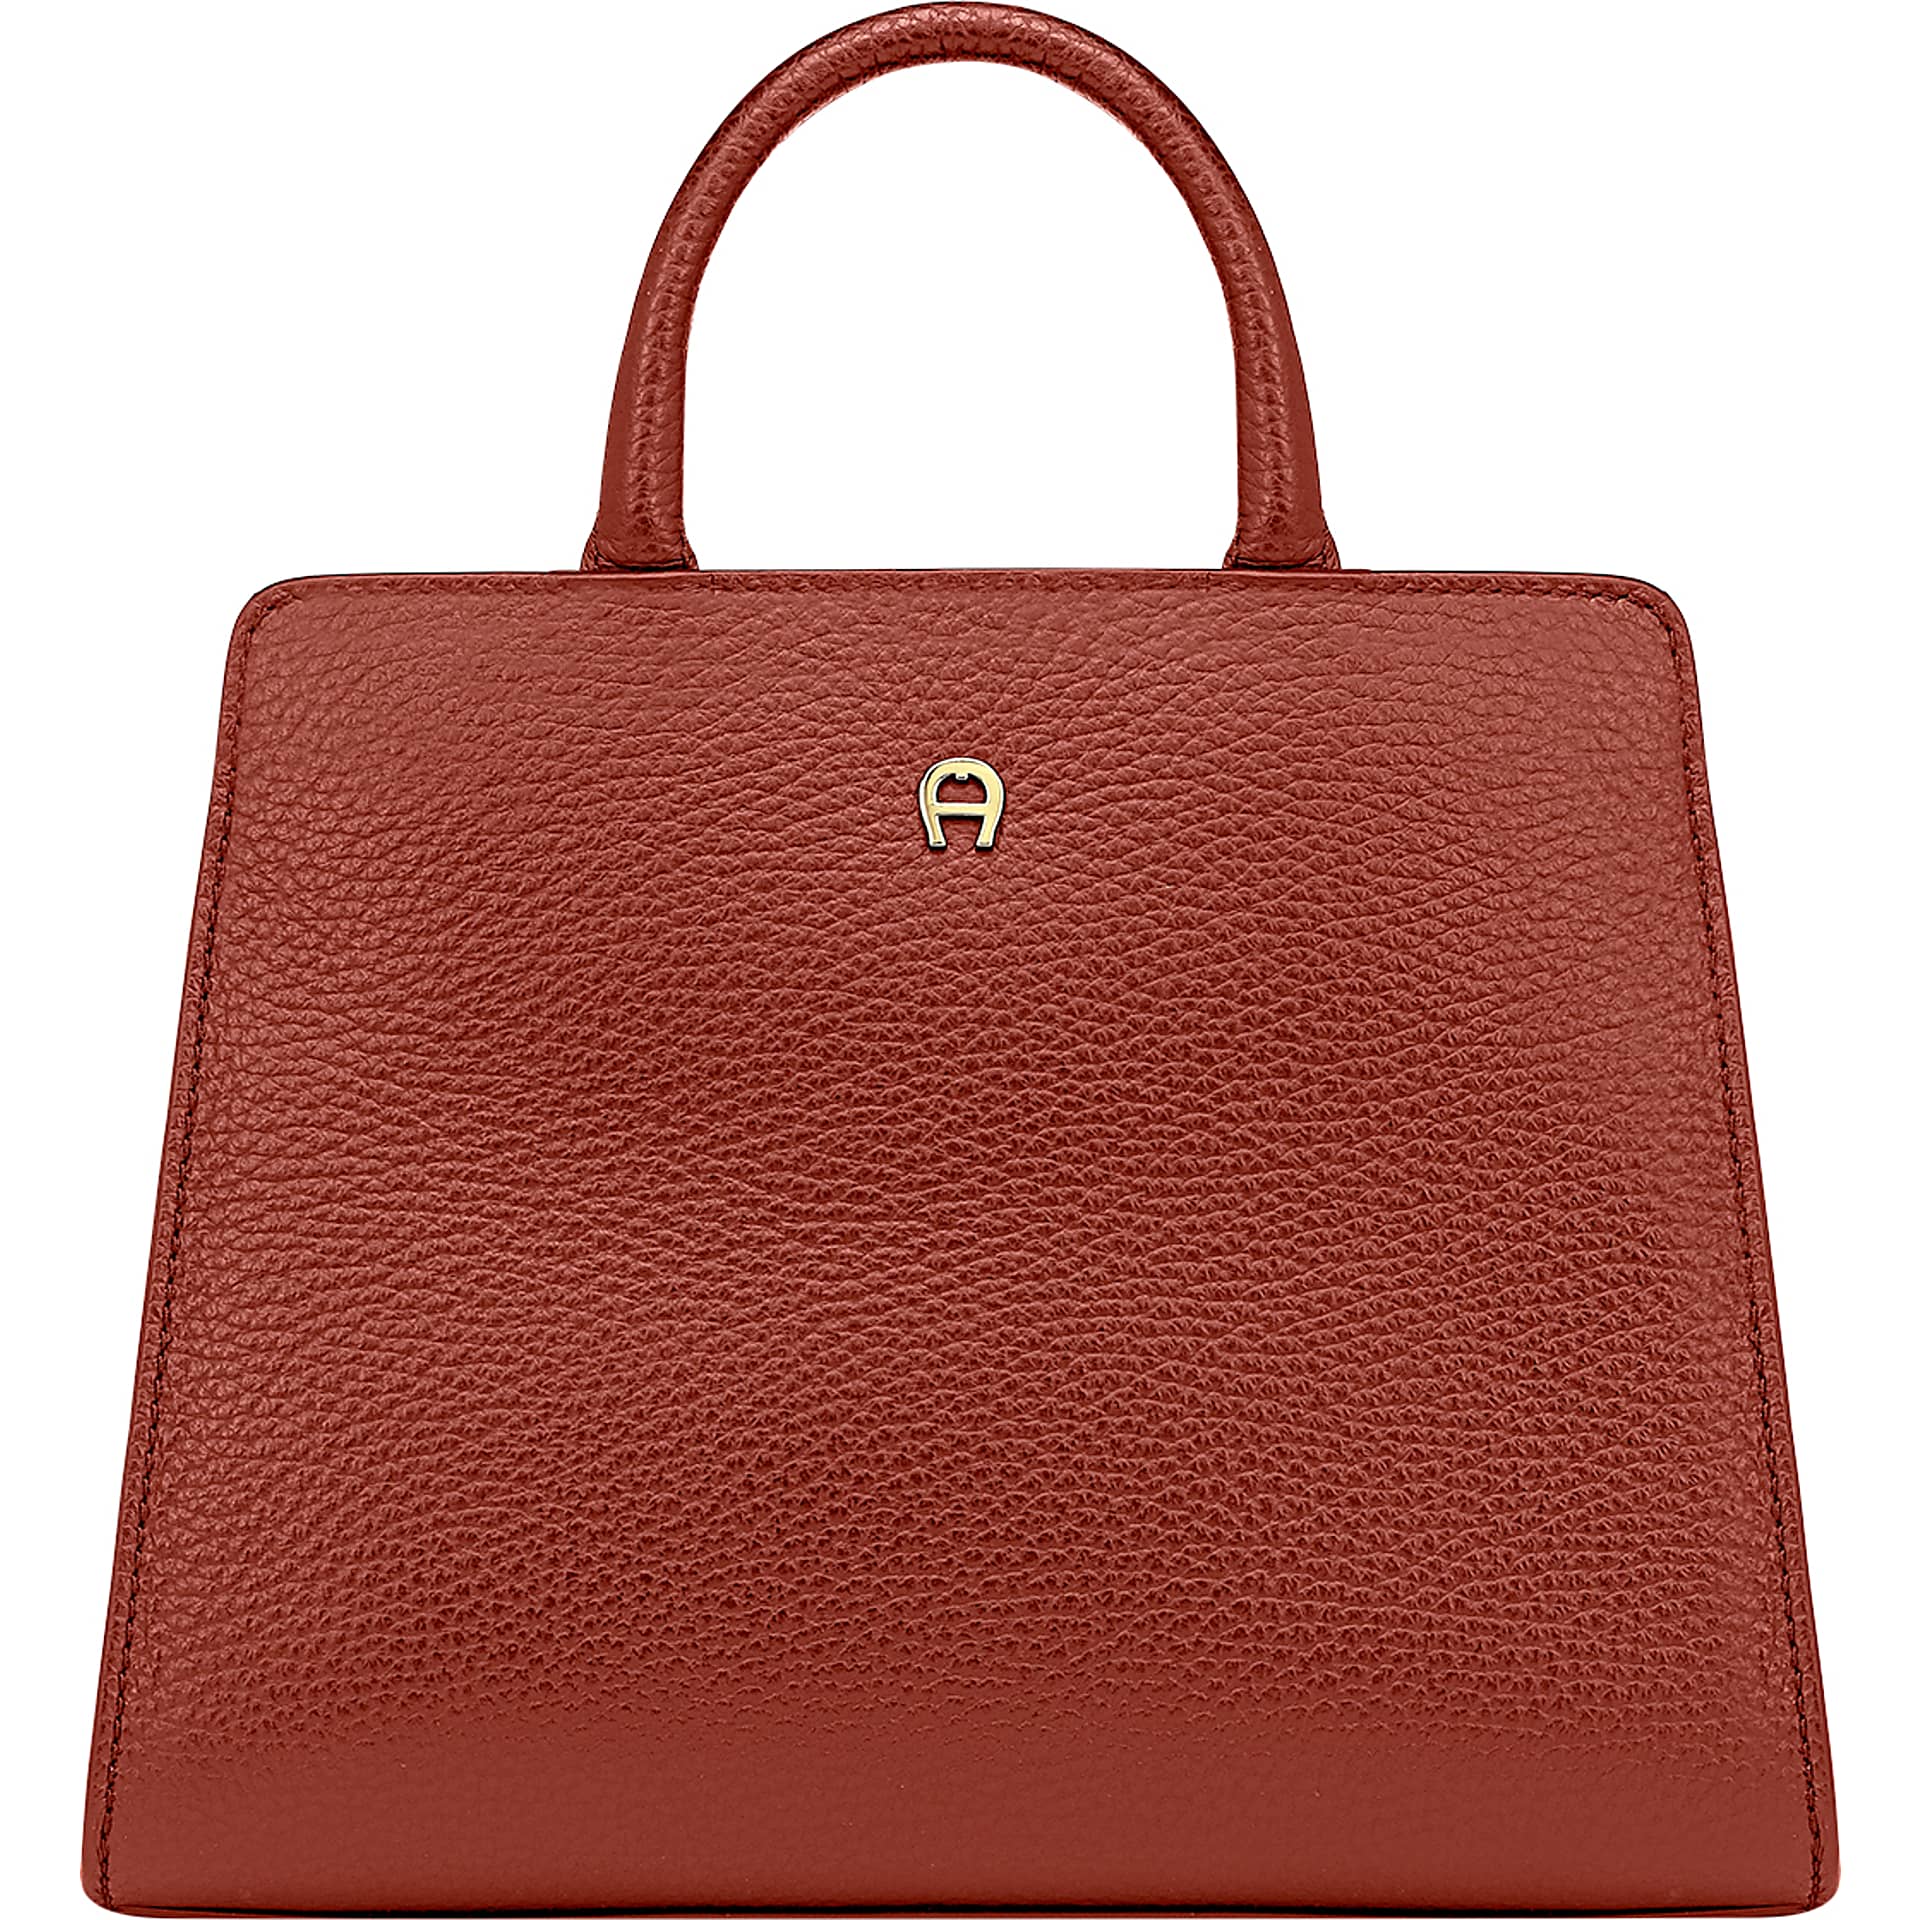 Luxury leather goods, and accessories - Aigner